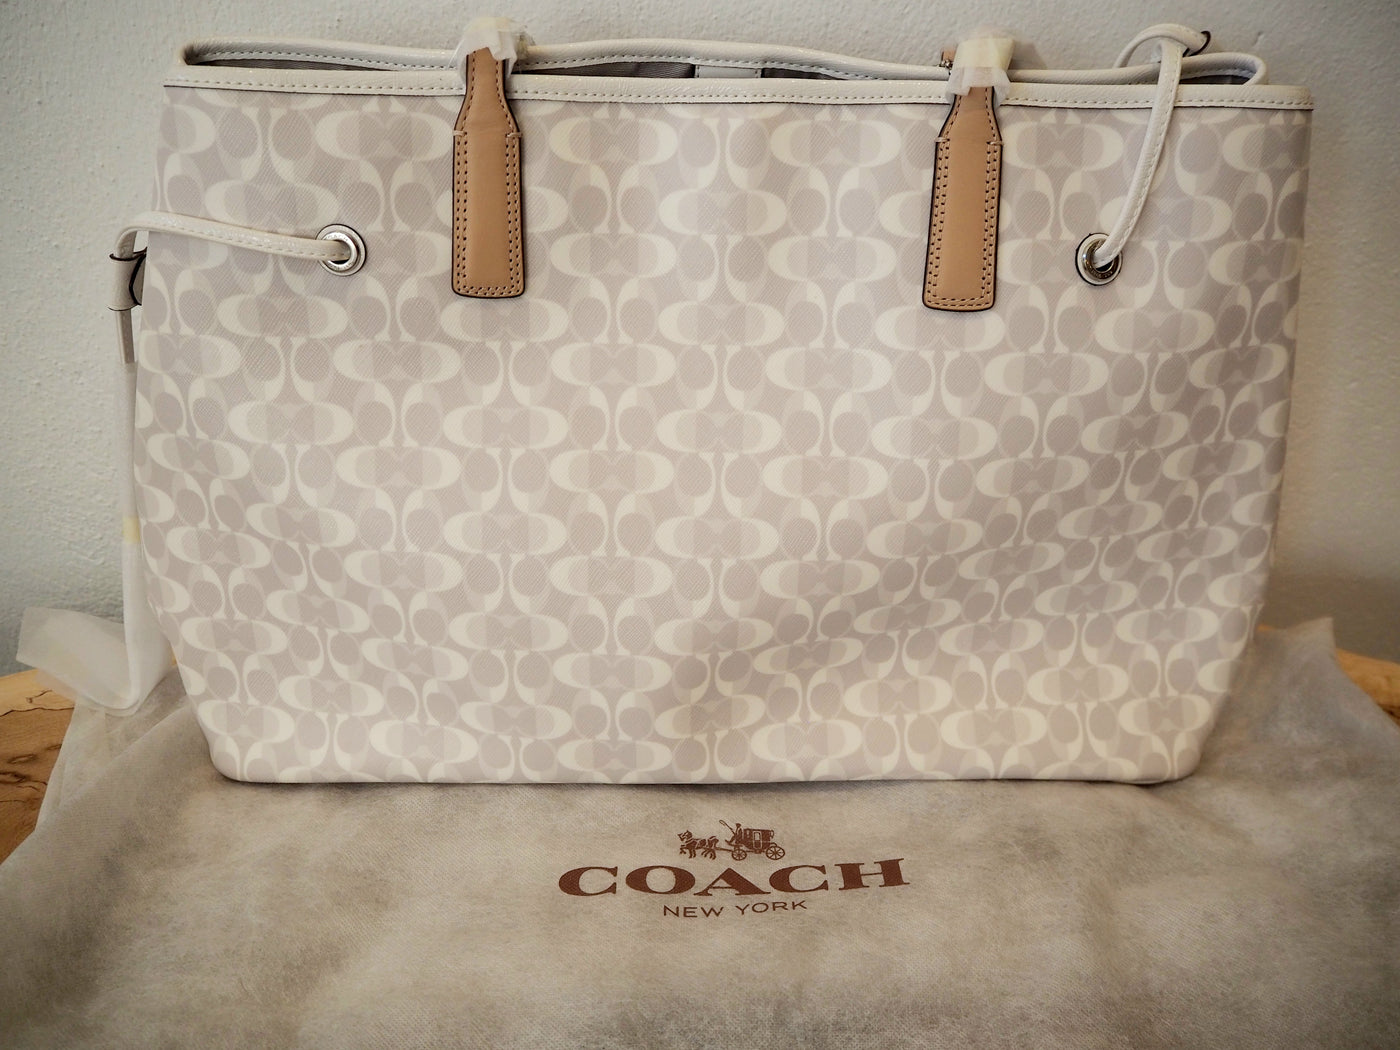 Coach Grey/White Large Tote New with Tags